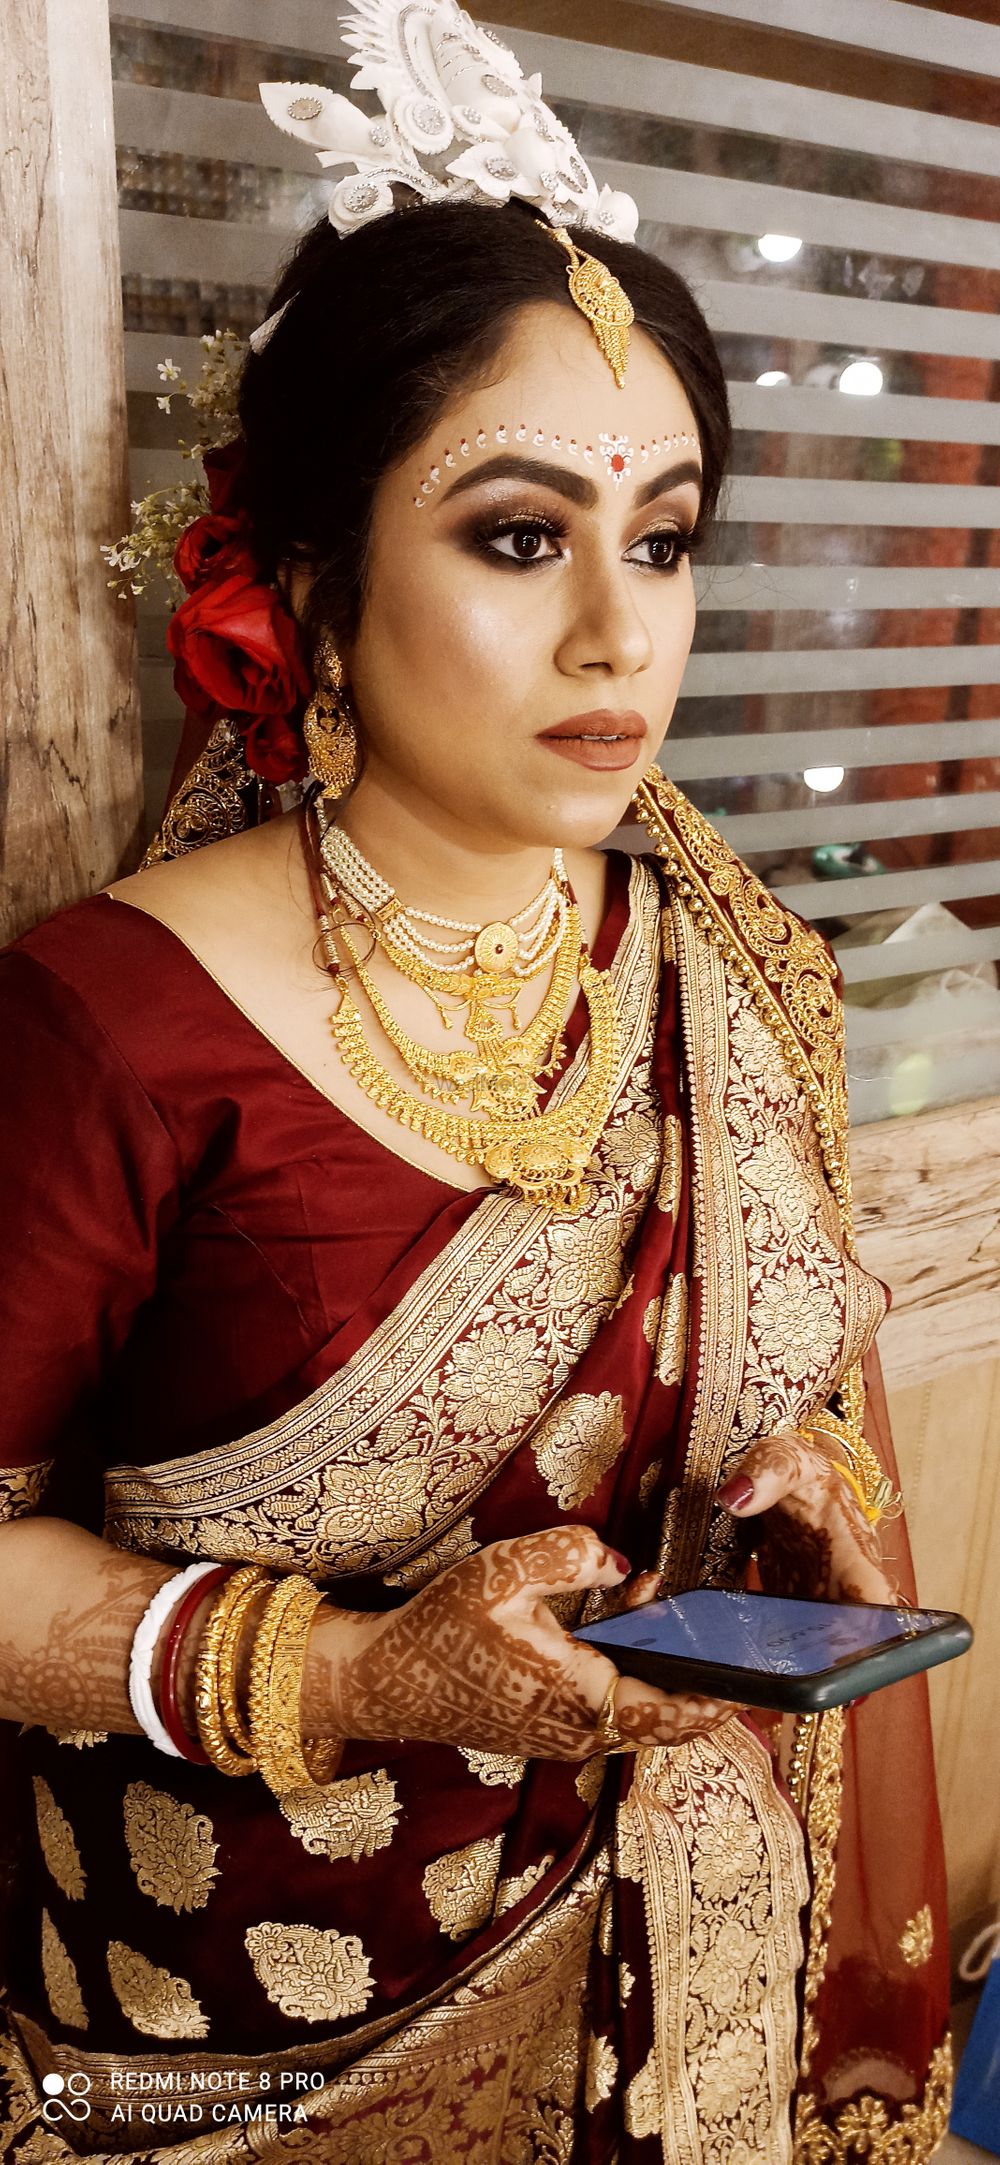 Photo From Bridal Makeover-54 - By Rupa's Makeup Mirror